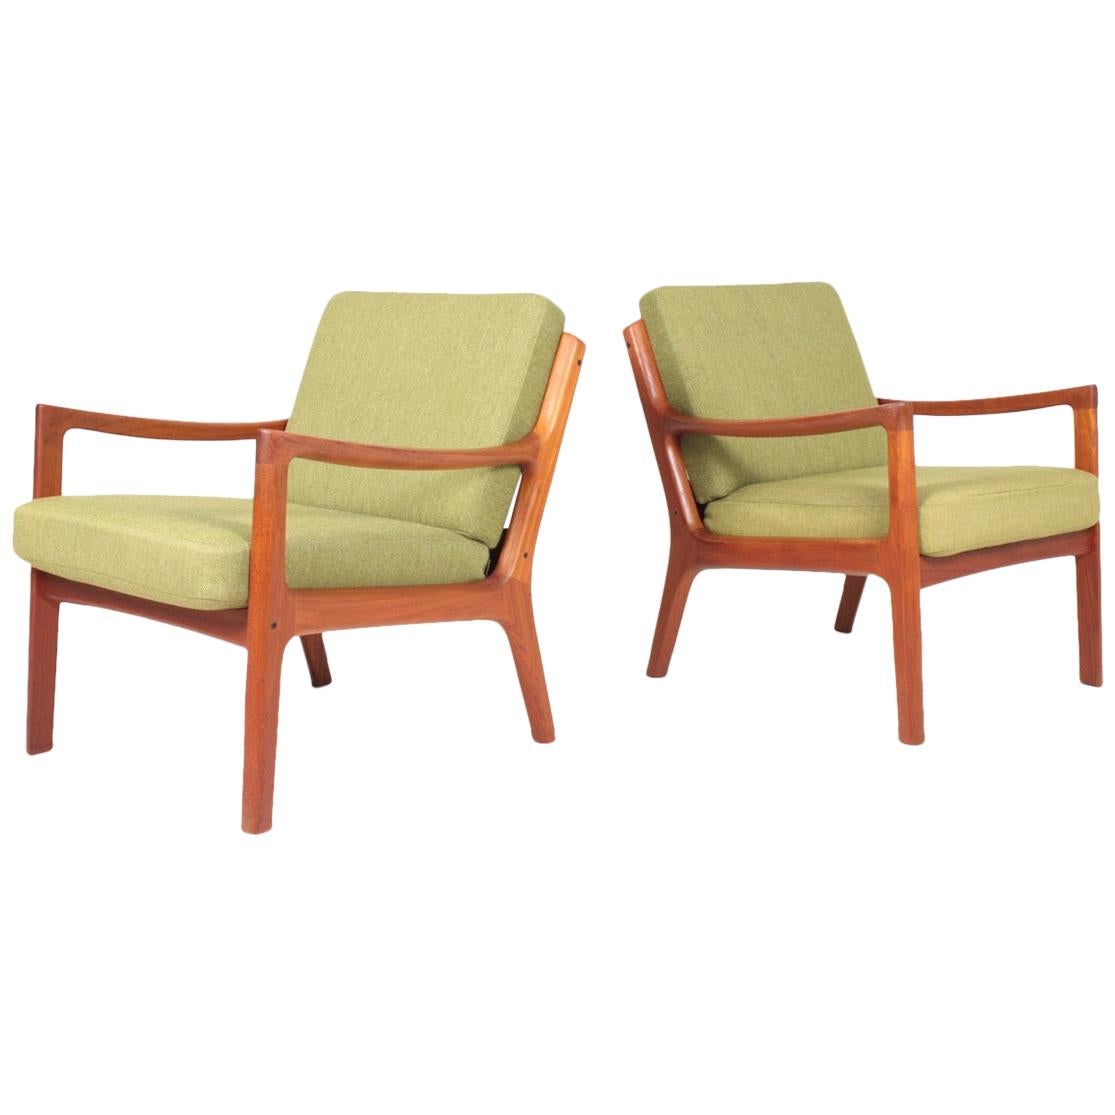 Pair of Midcentury Lounge Chairs by Ole Wanscher, Danish Design 1950s